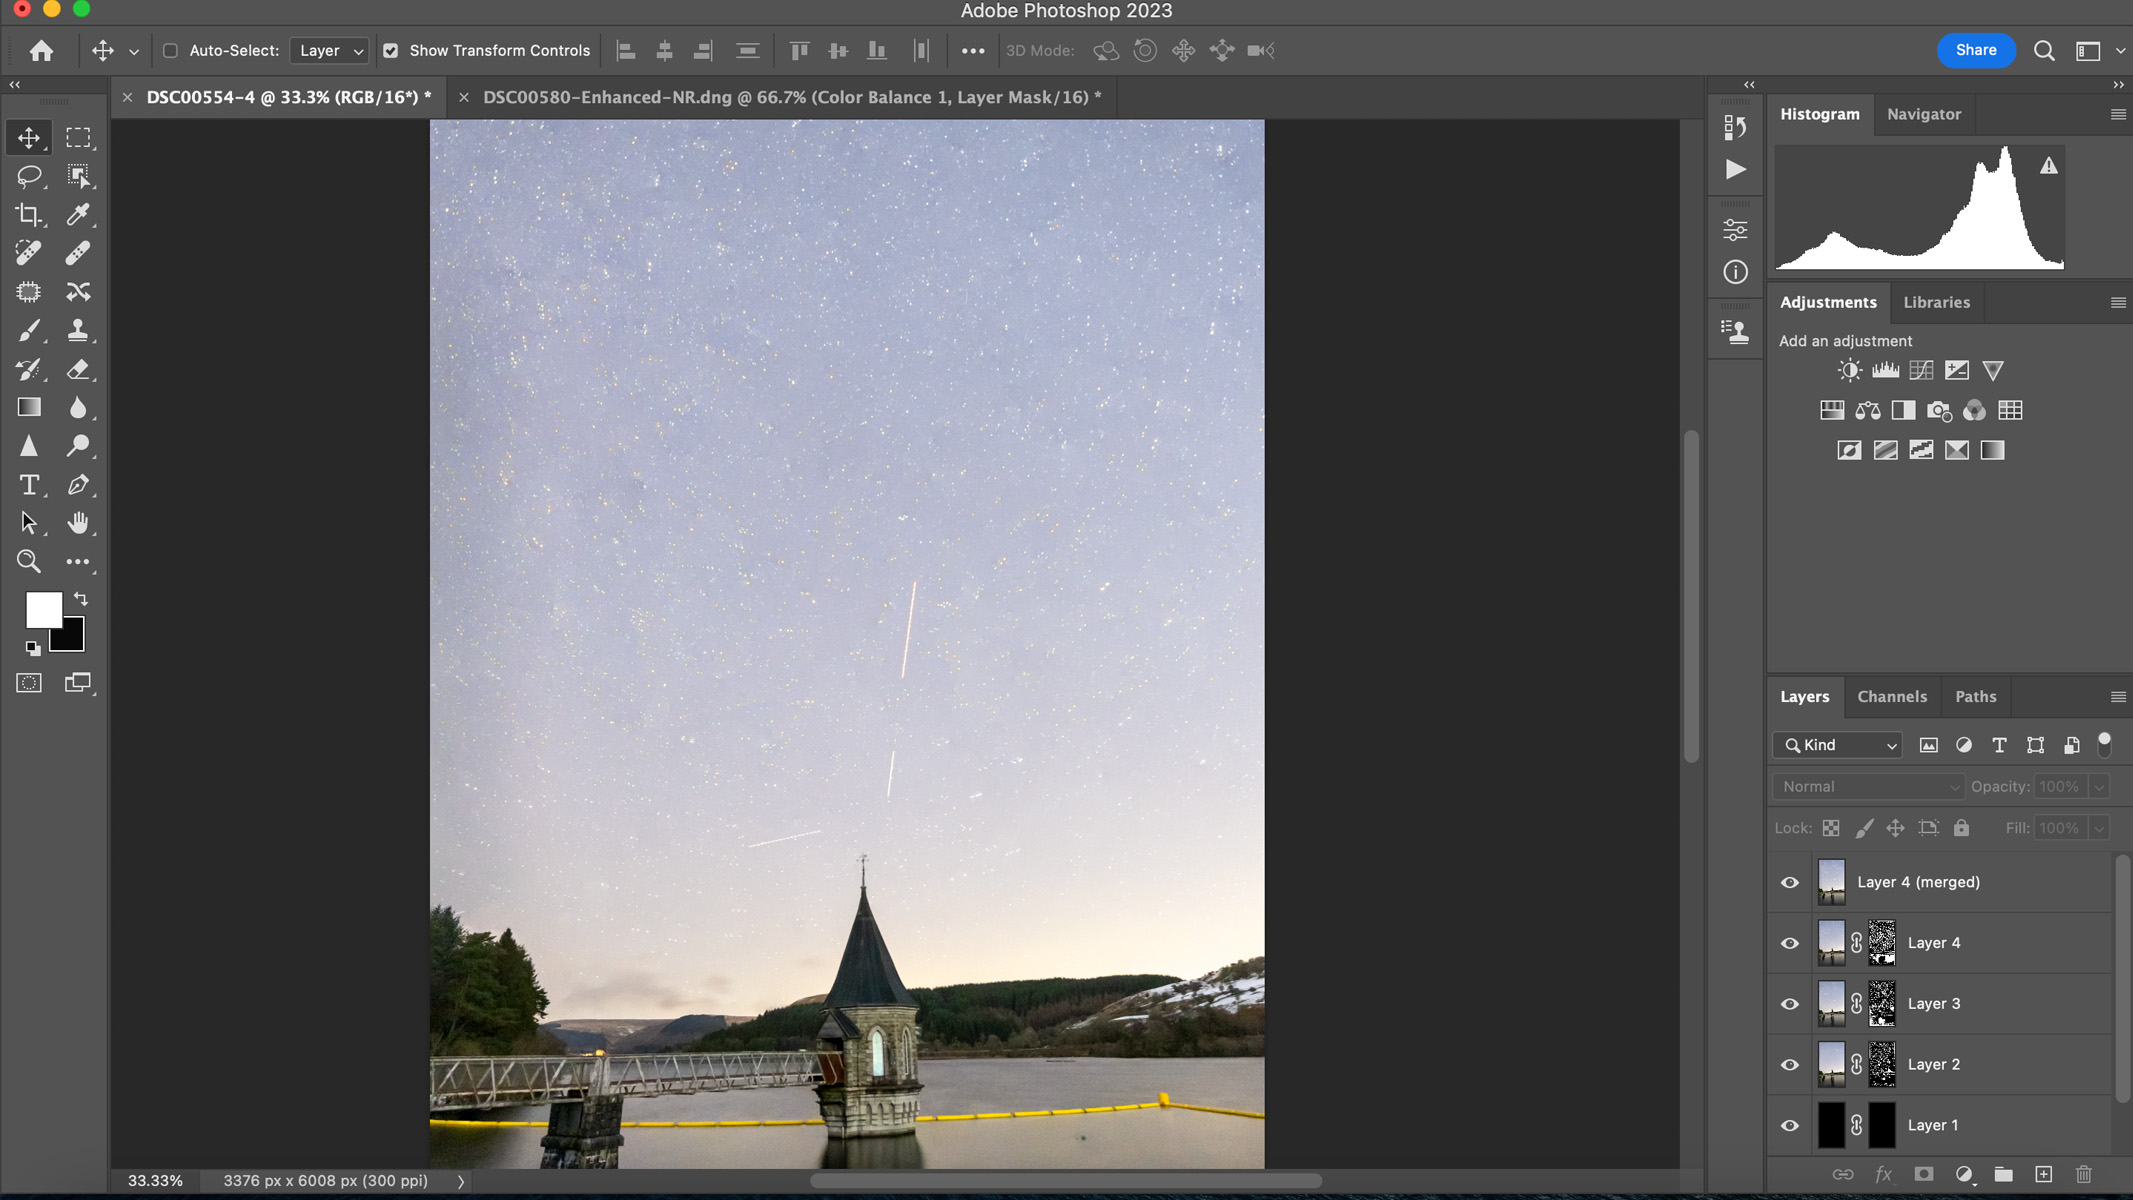 Astro image being edited in photoshop